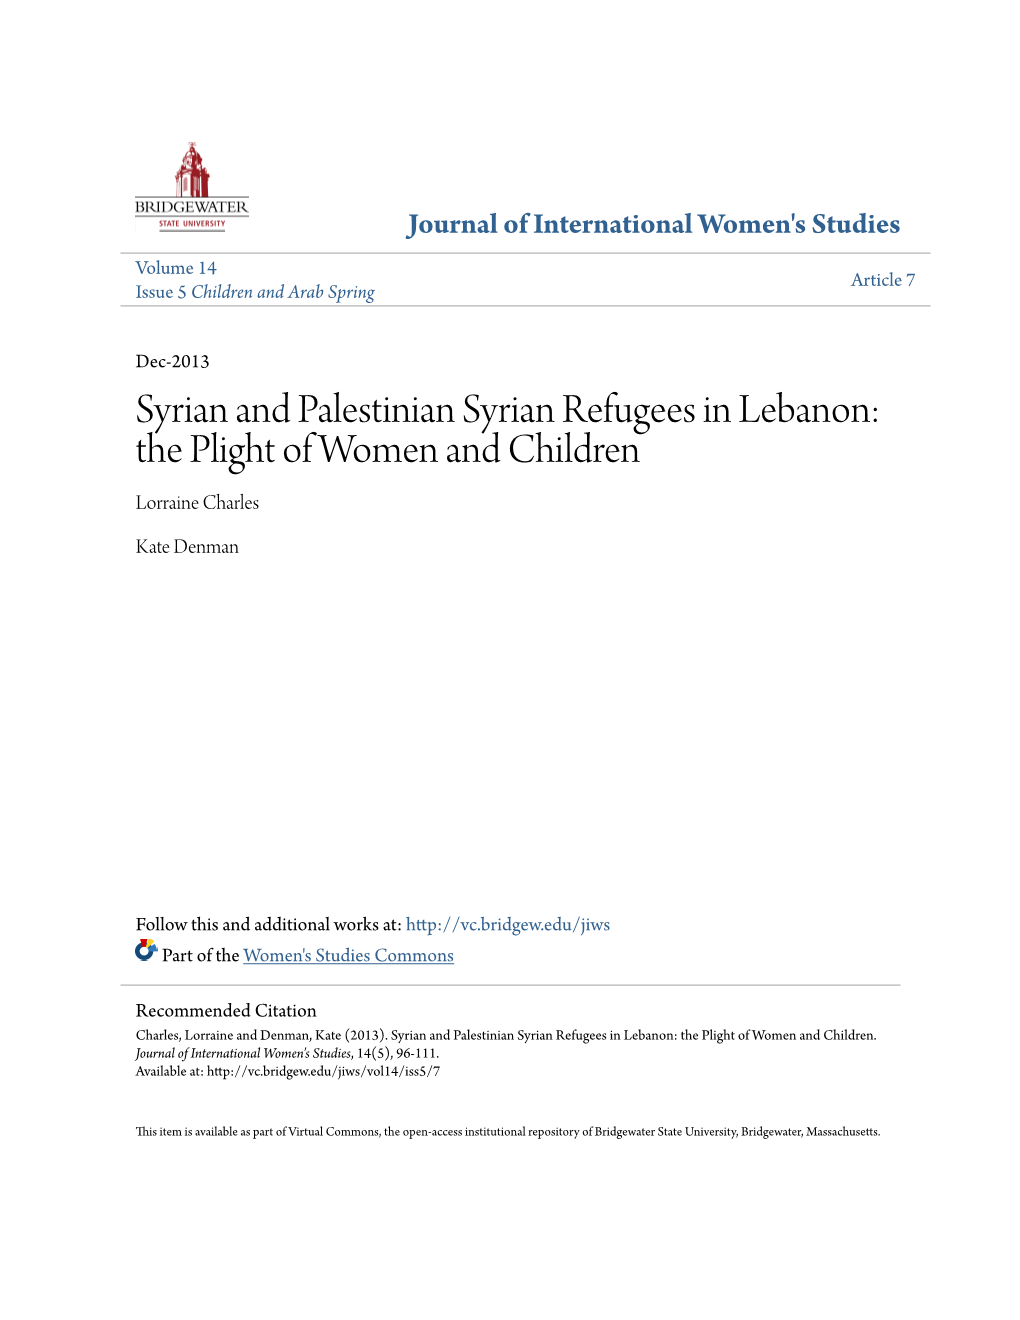 Syrian and Palestinian Syrian Refugees in Lebanon: the Plight of Women and Children Lorraine Charles